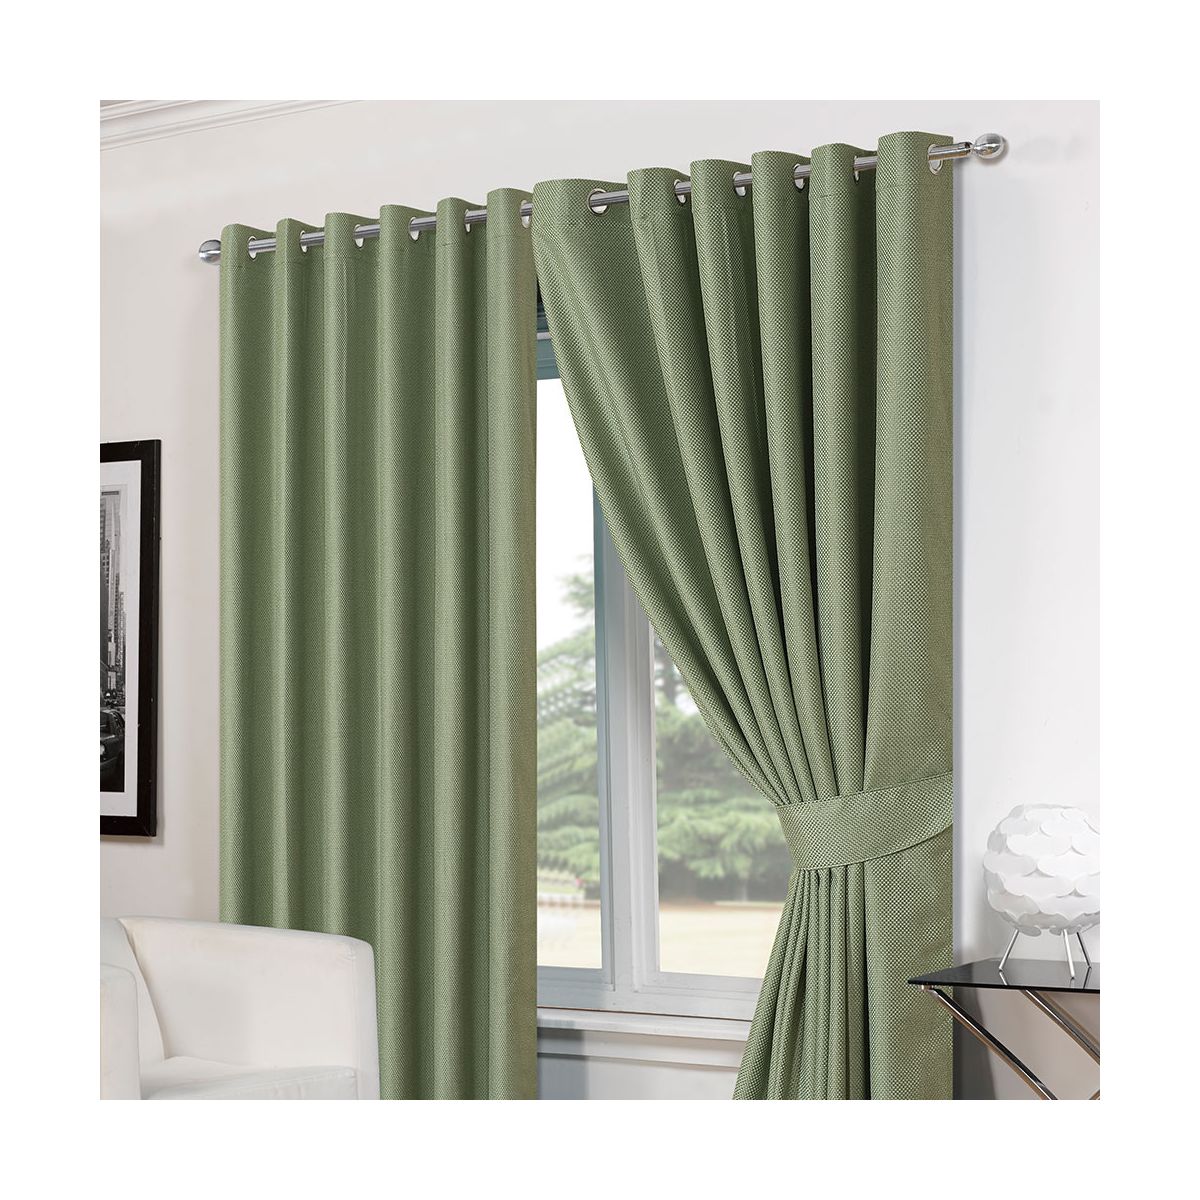 Luxury Basket Weave Lined  Eyelet Curtains with Tiebacks - Soft Green